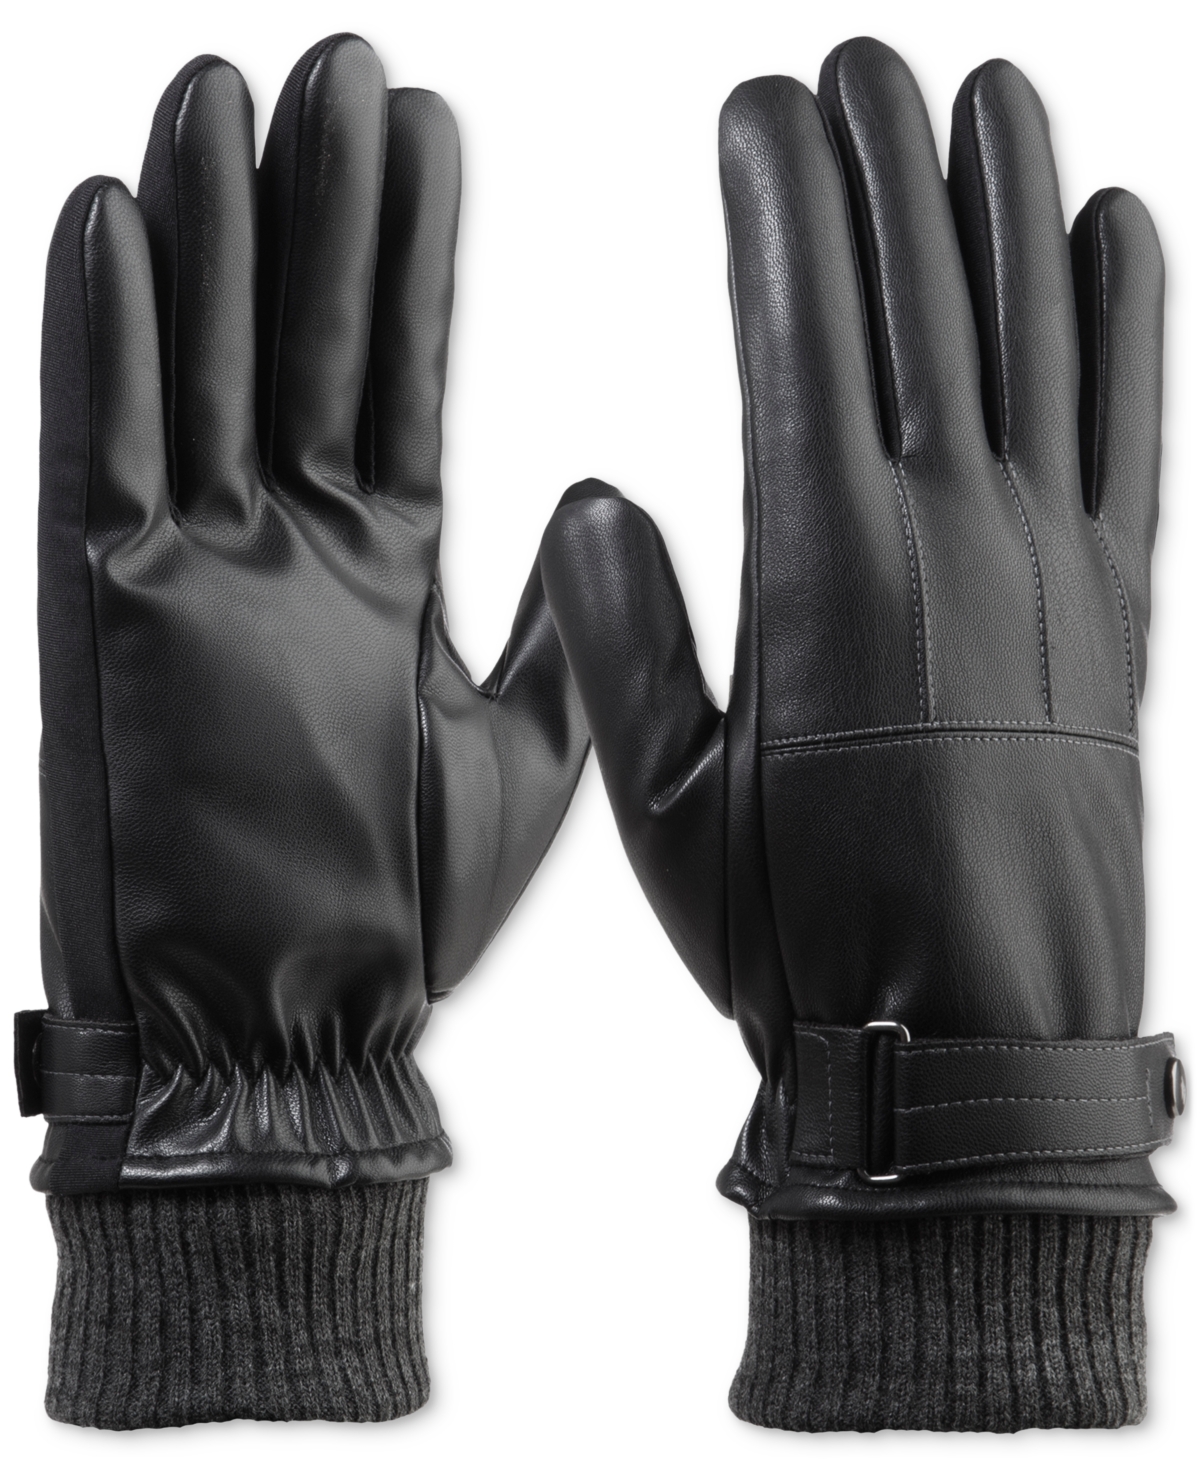 Men's Touchscreen Insulated Gloves with Knit Cuffs - Black